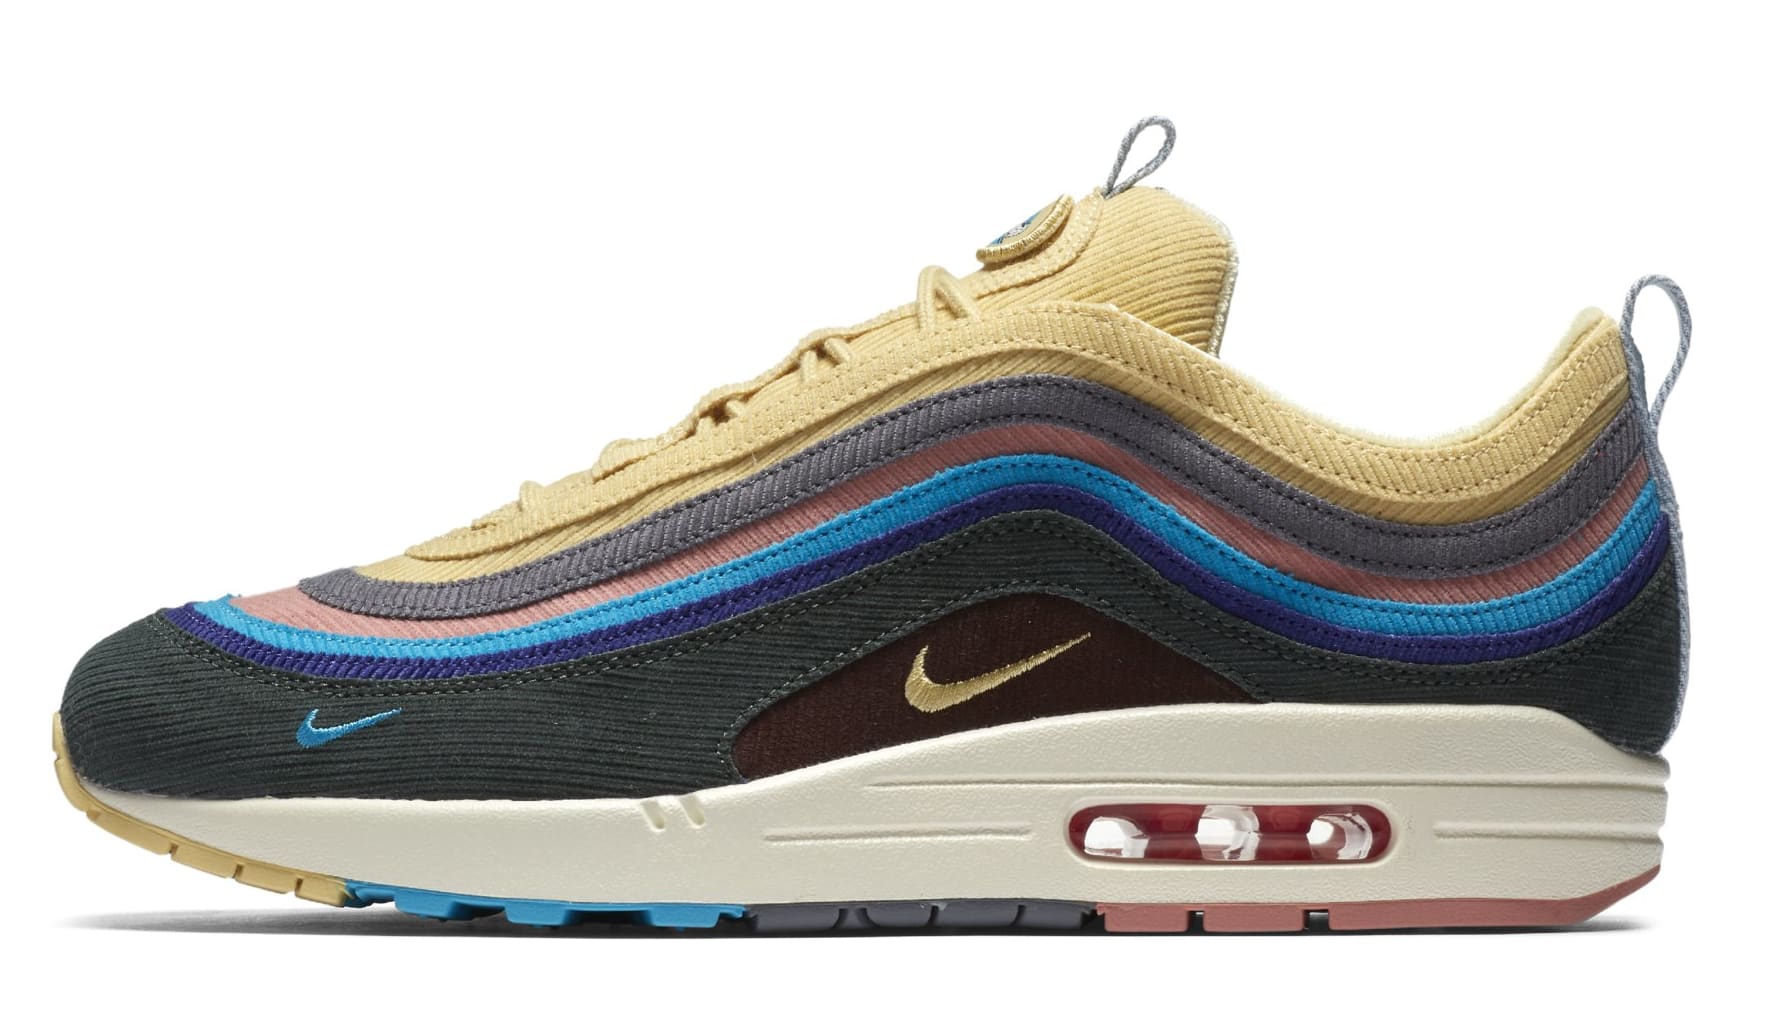 Sean Wotherspoon Talks About the 